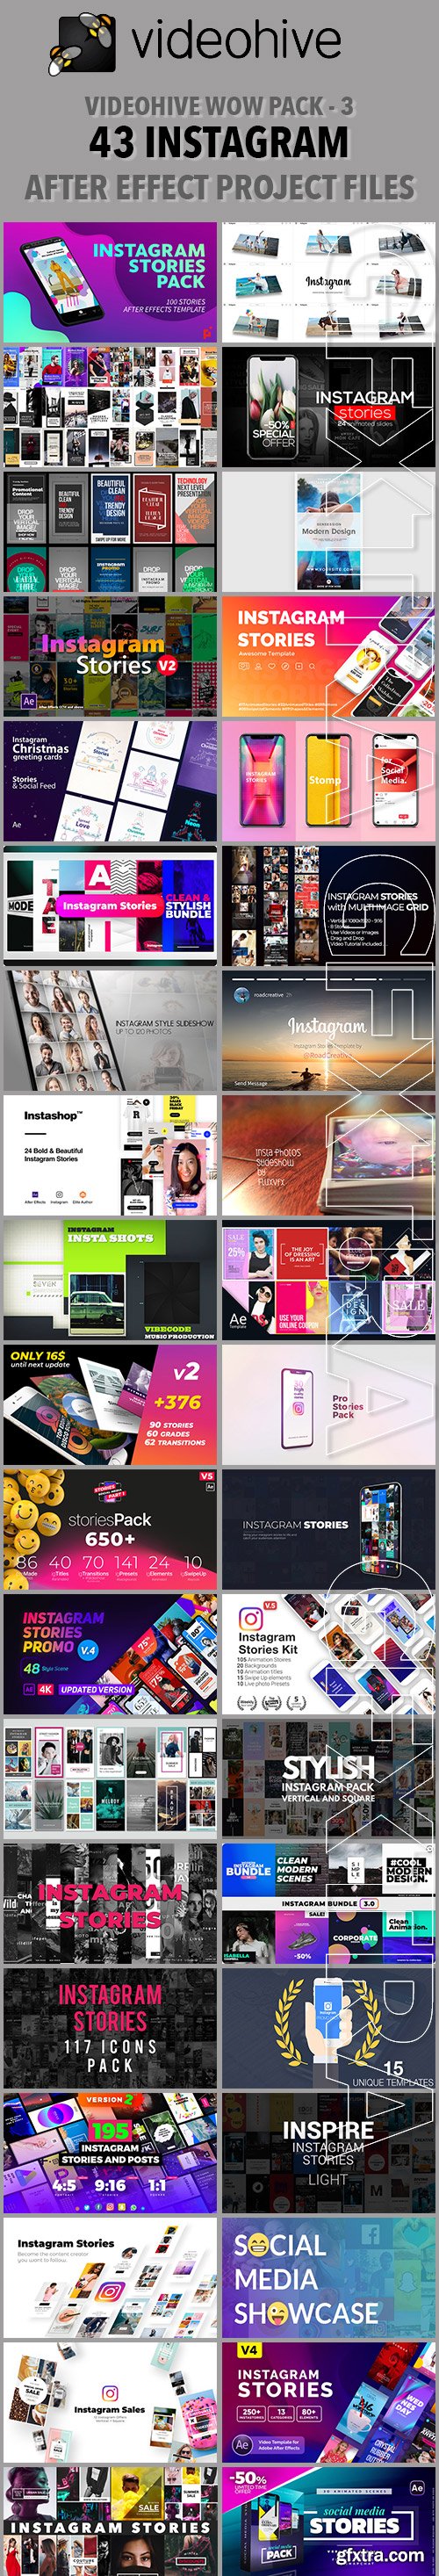 Videohive Wow Pack - 3 - 43 Instagram After Effect Project Files